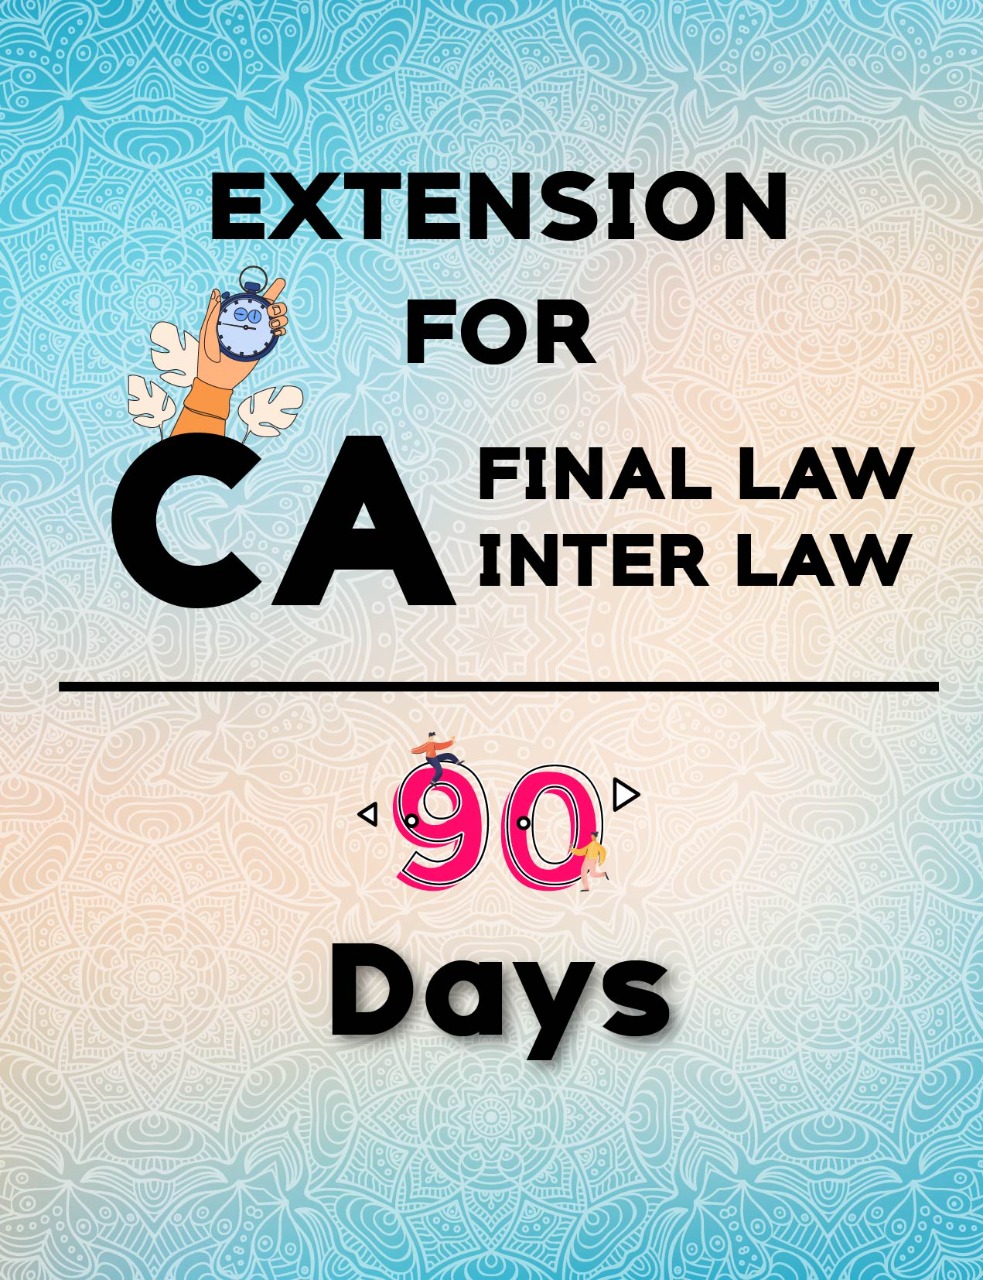 extension-of-ca-final-law-and-ca-inter-law-lectures-for-90-days